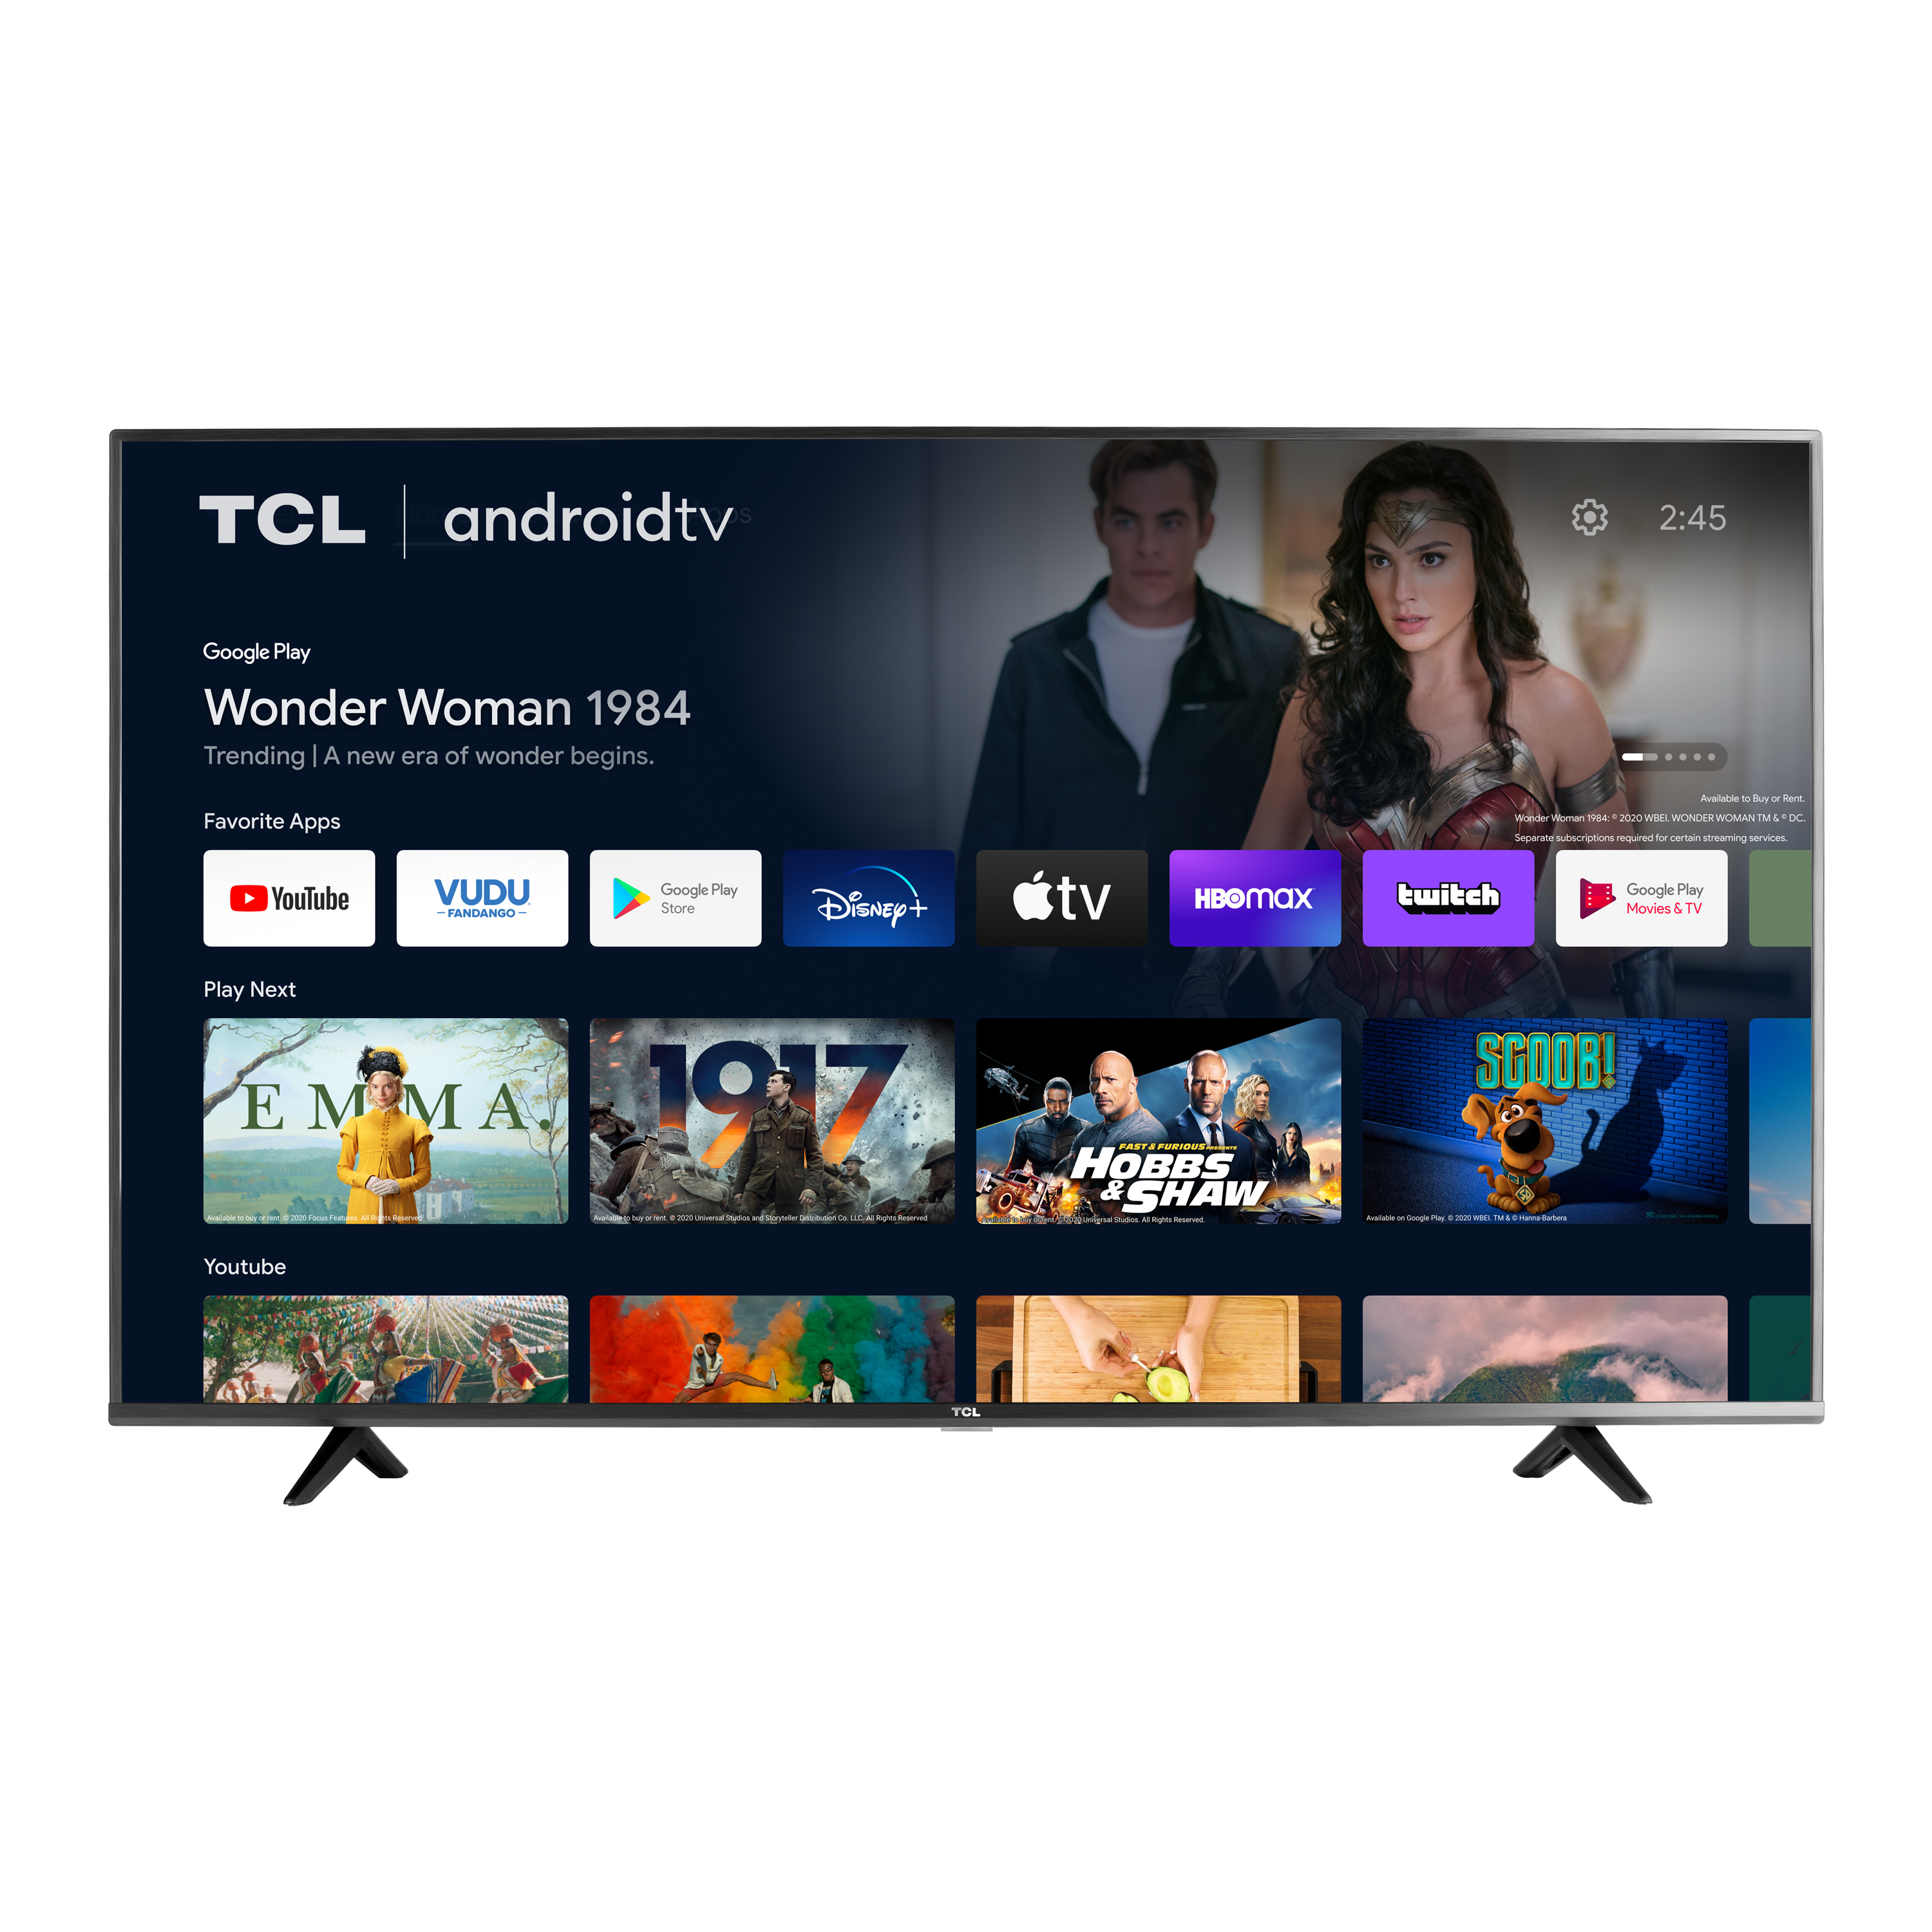 TCL 43" Class 4-Series 4K UHD HDR LED Smart Android TV - 43S434 - image 1 of 11